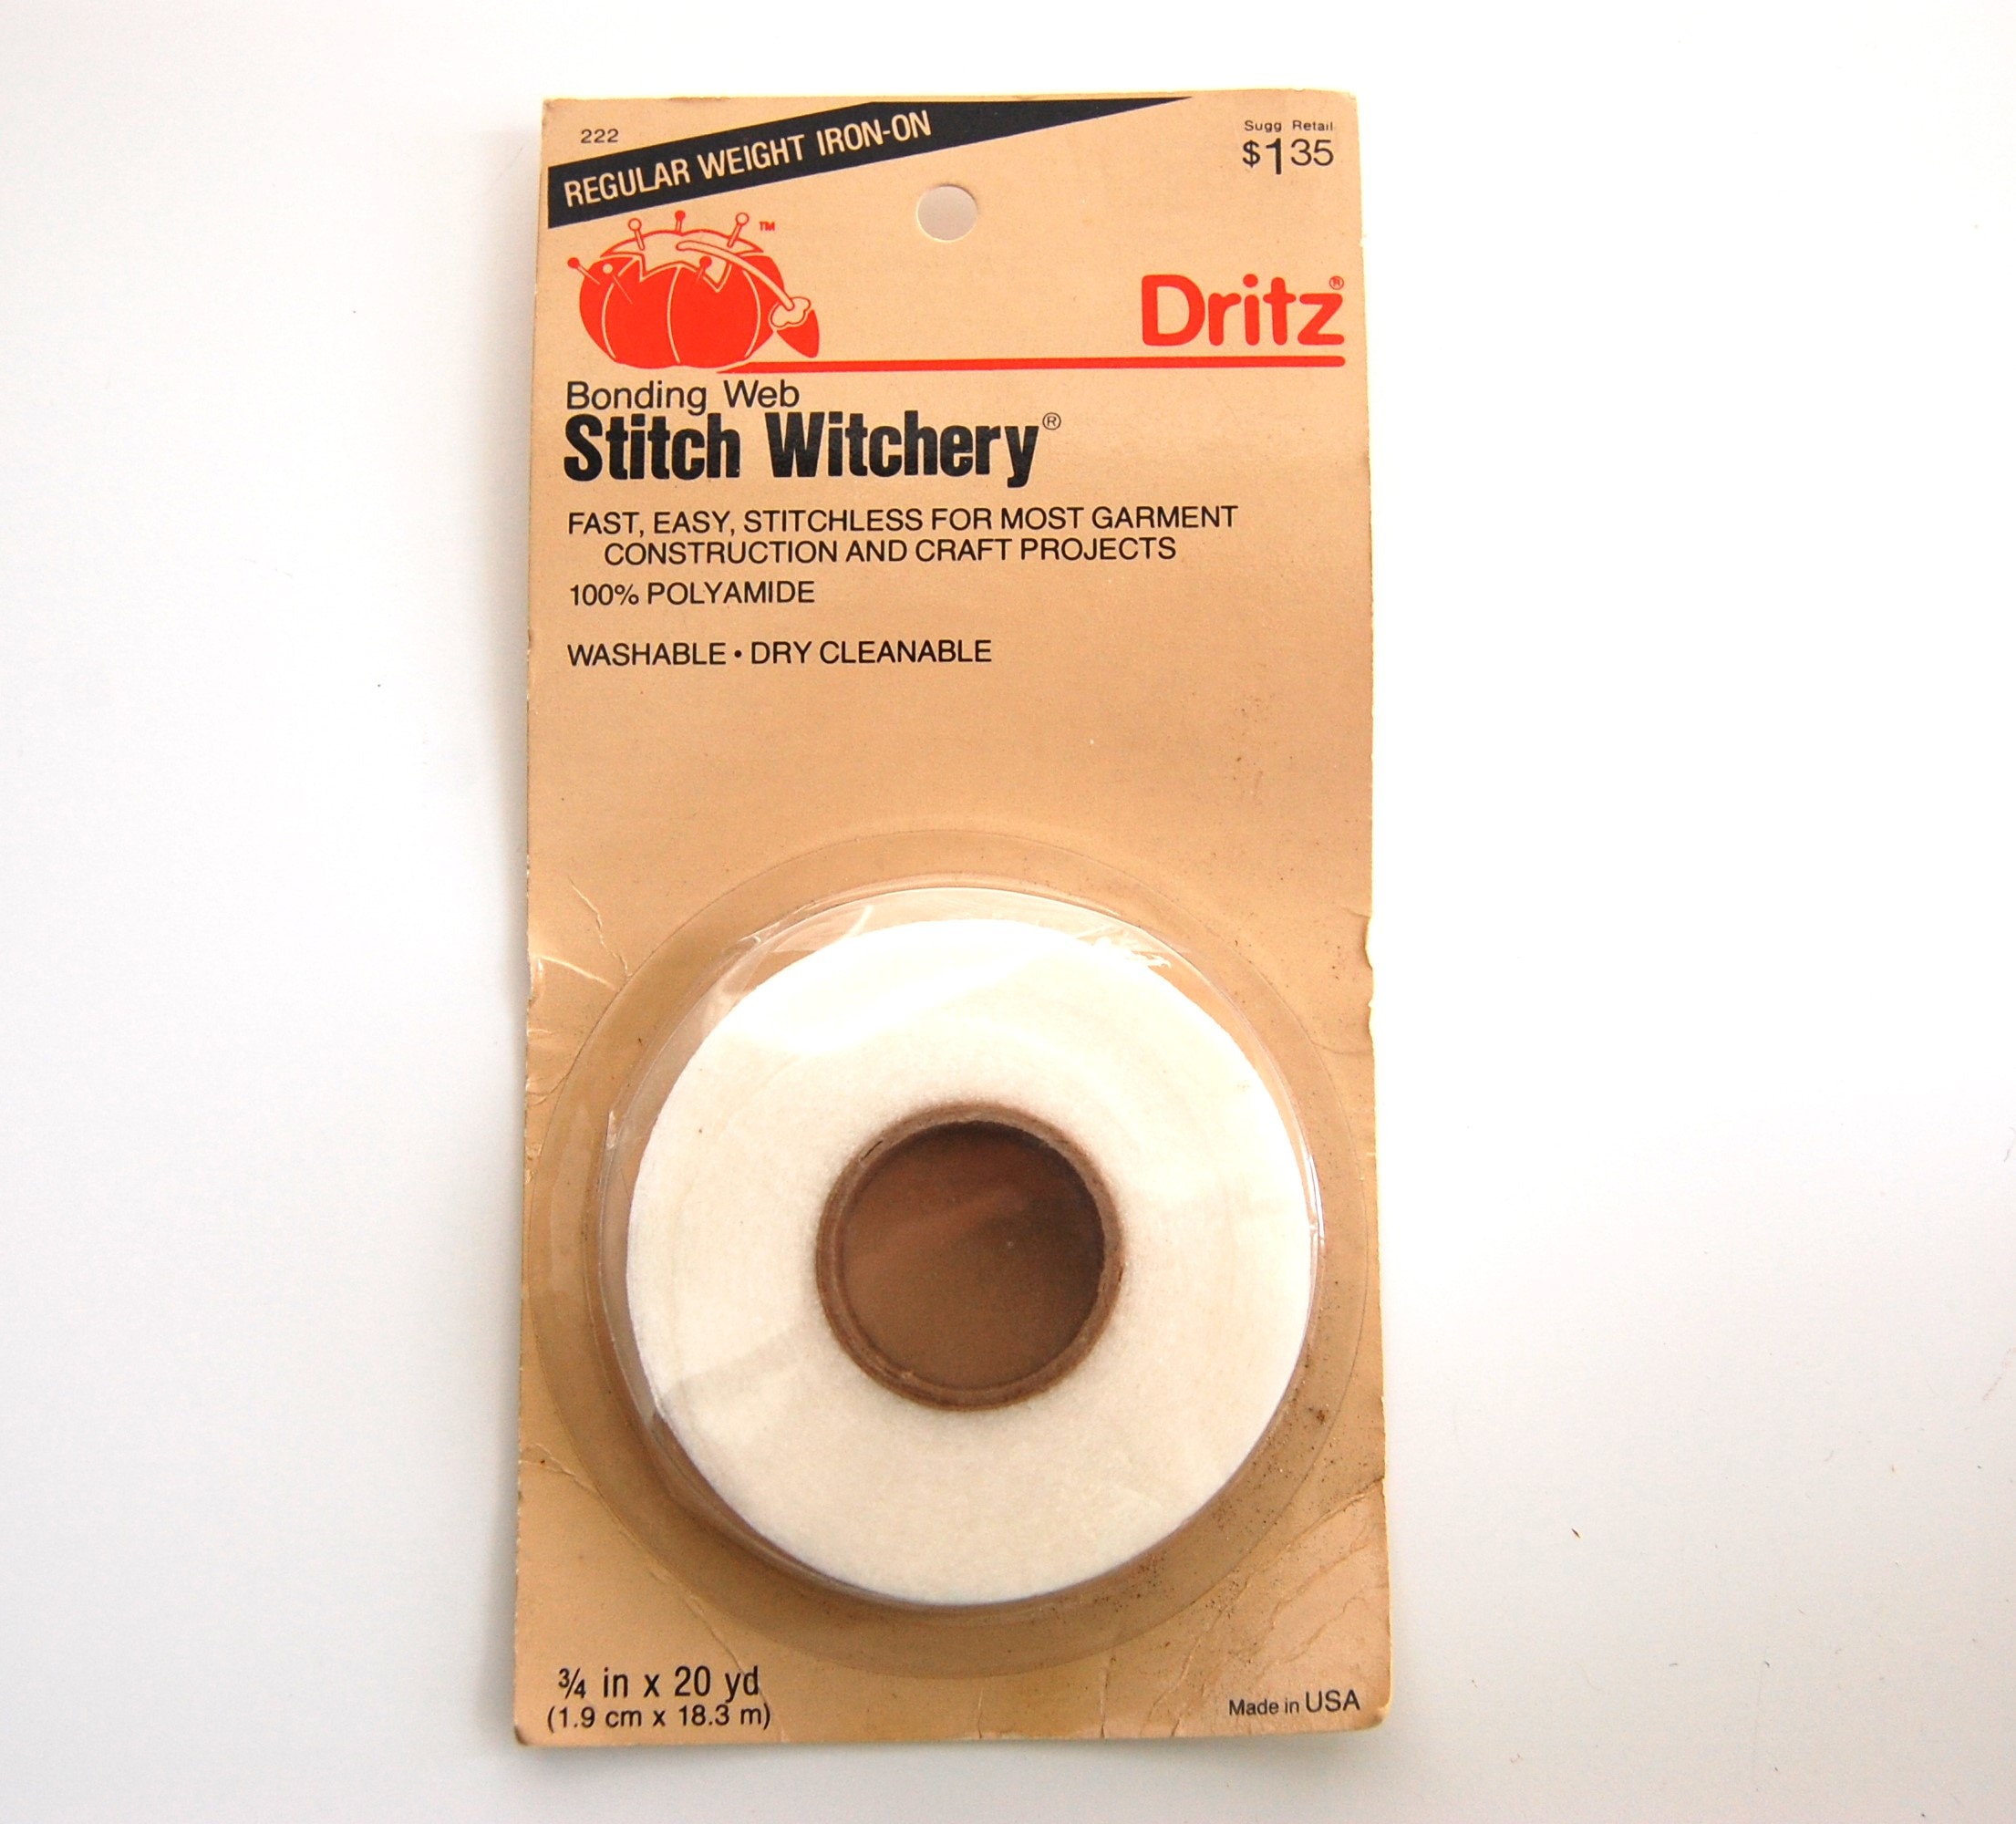 Vintage 1980s Dritz Stitch Witchery Sewing Notion Tool, Vintage